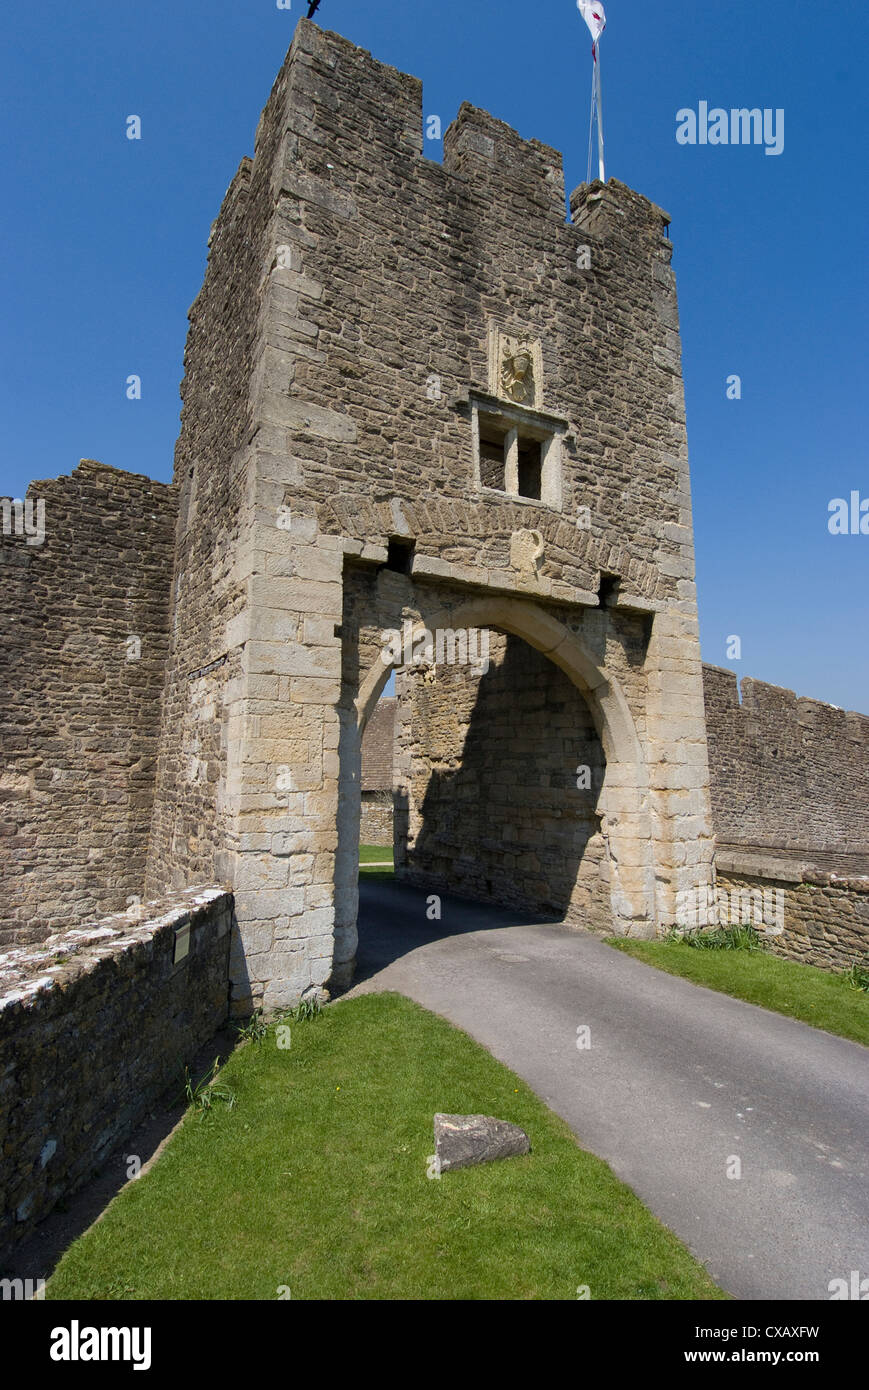 Gatehouse of the 14th century Farleigh Hungerford Castle, Somerset, England, United Kingdom, Europe Stock Photo